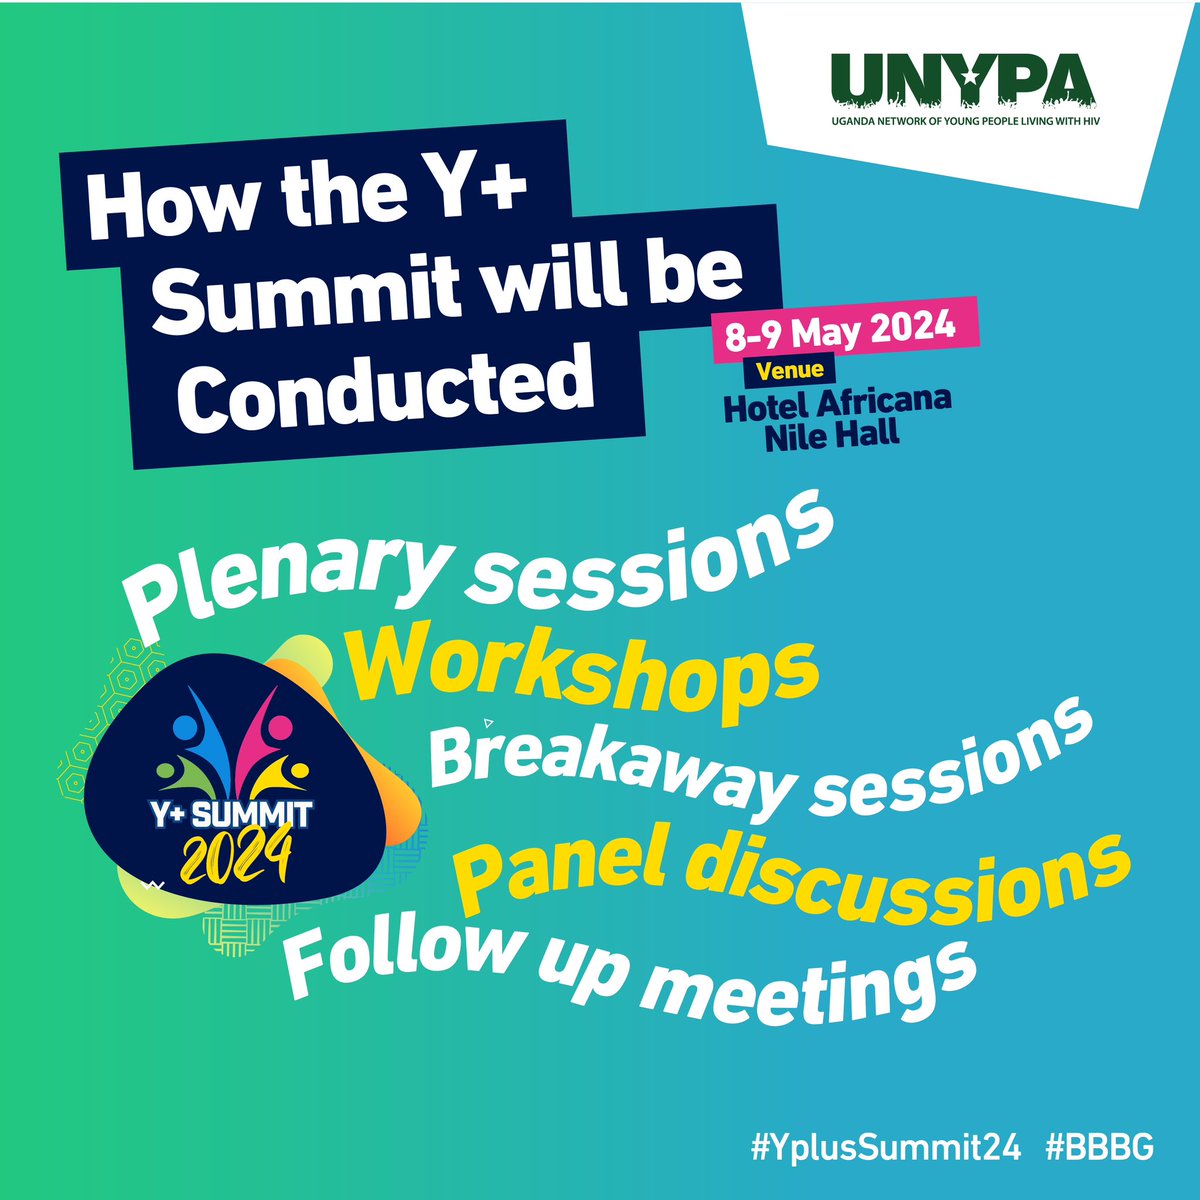 The #YPlusSummit24 will likely feature plenary sessions for keynotes and overarching themes, workshops for learning, breakaway sessions for more focused discussions, panel discussions for diverse perspectives, and follow-up meetings to ensure continuity. #BBBG